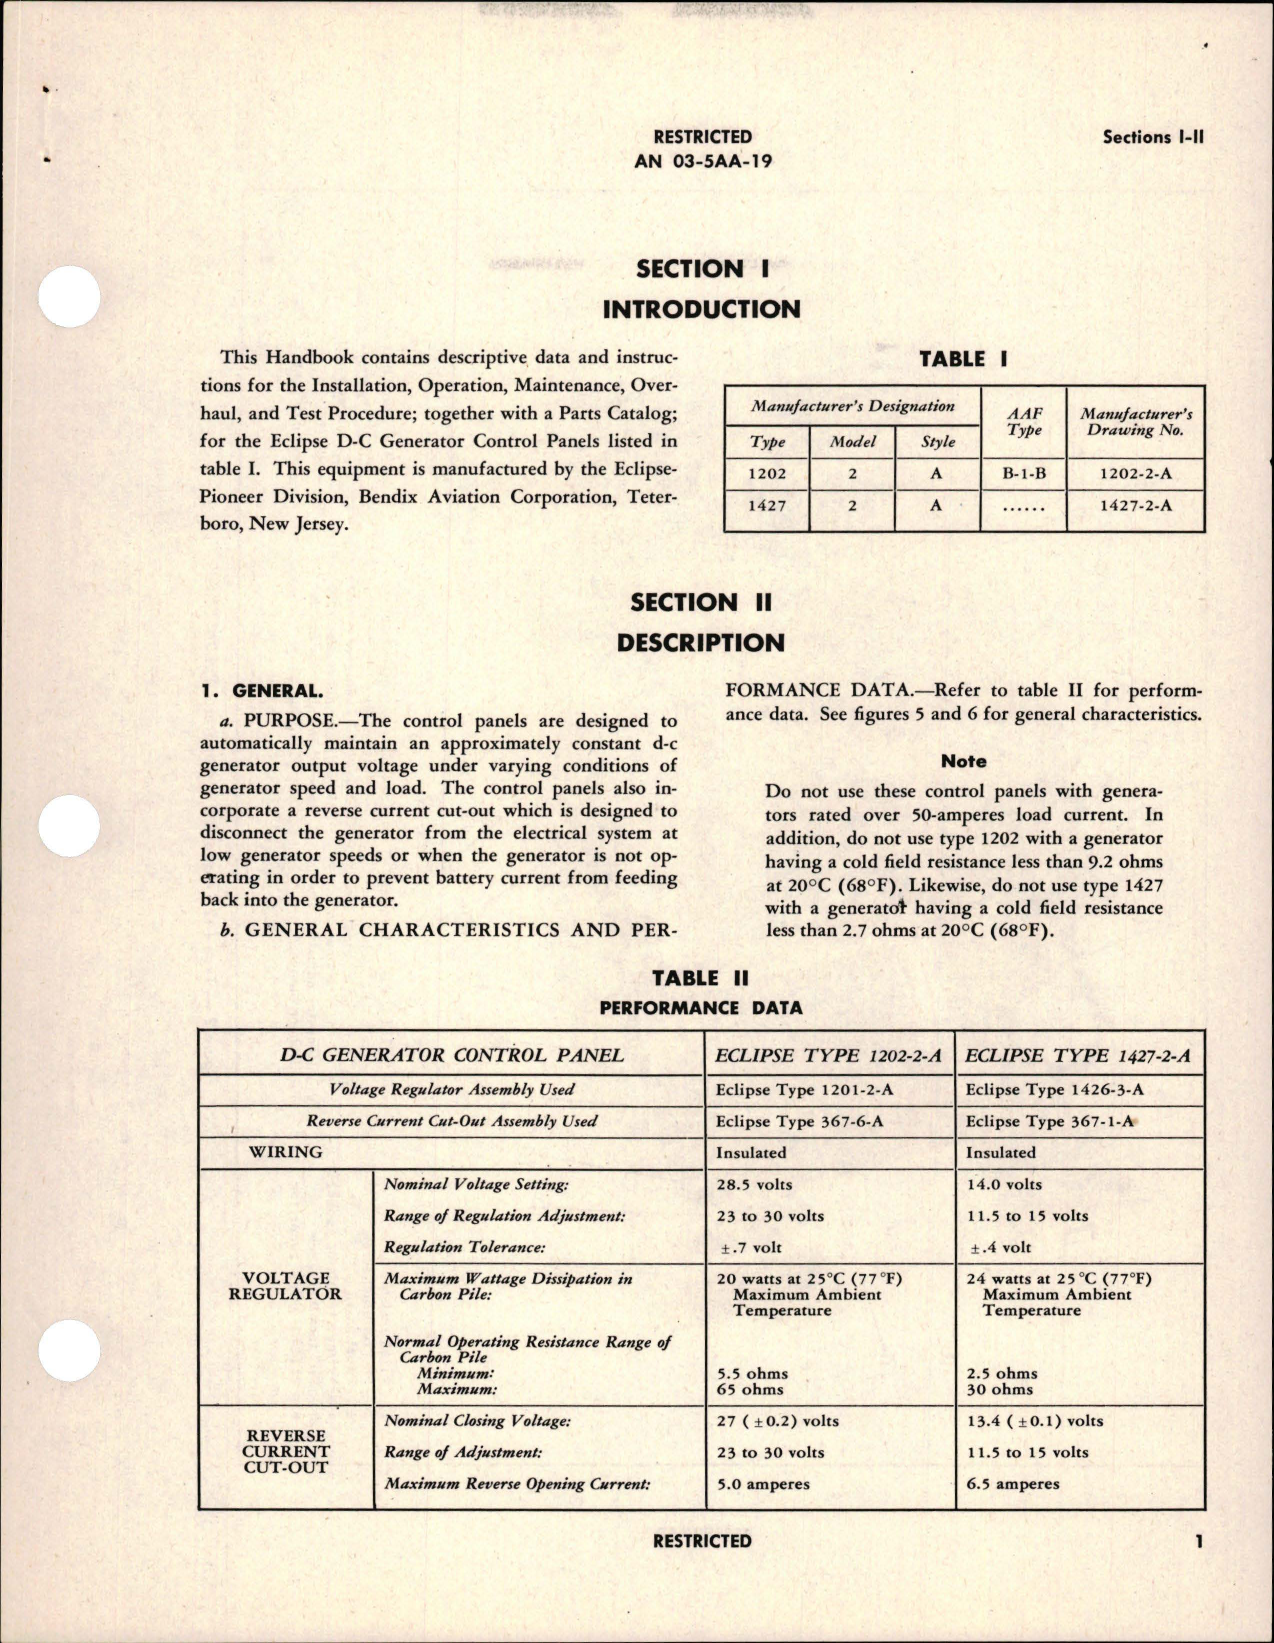 Sample page 5 from AirCorps Library document: Operation, Service and Overhaul Instructions with Parts Catalog for DC Generator Control Panels - AAF Type B-1-B - Eclipse Type 1202 and 1427